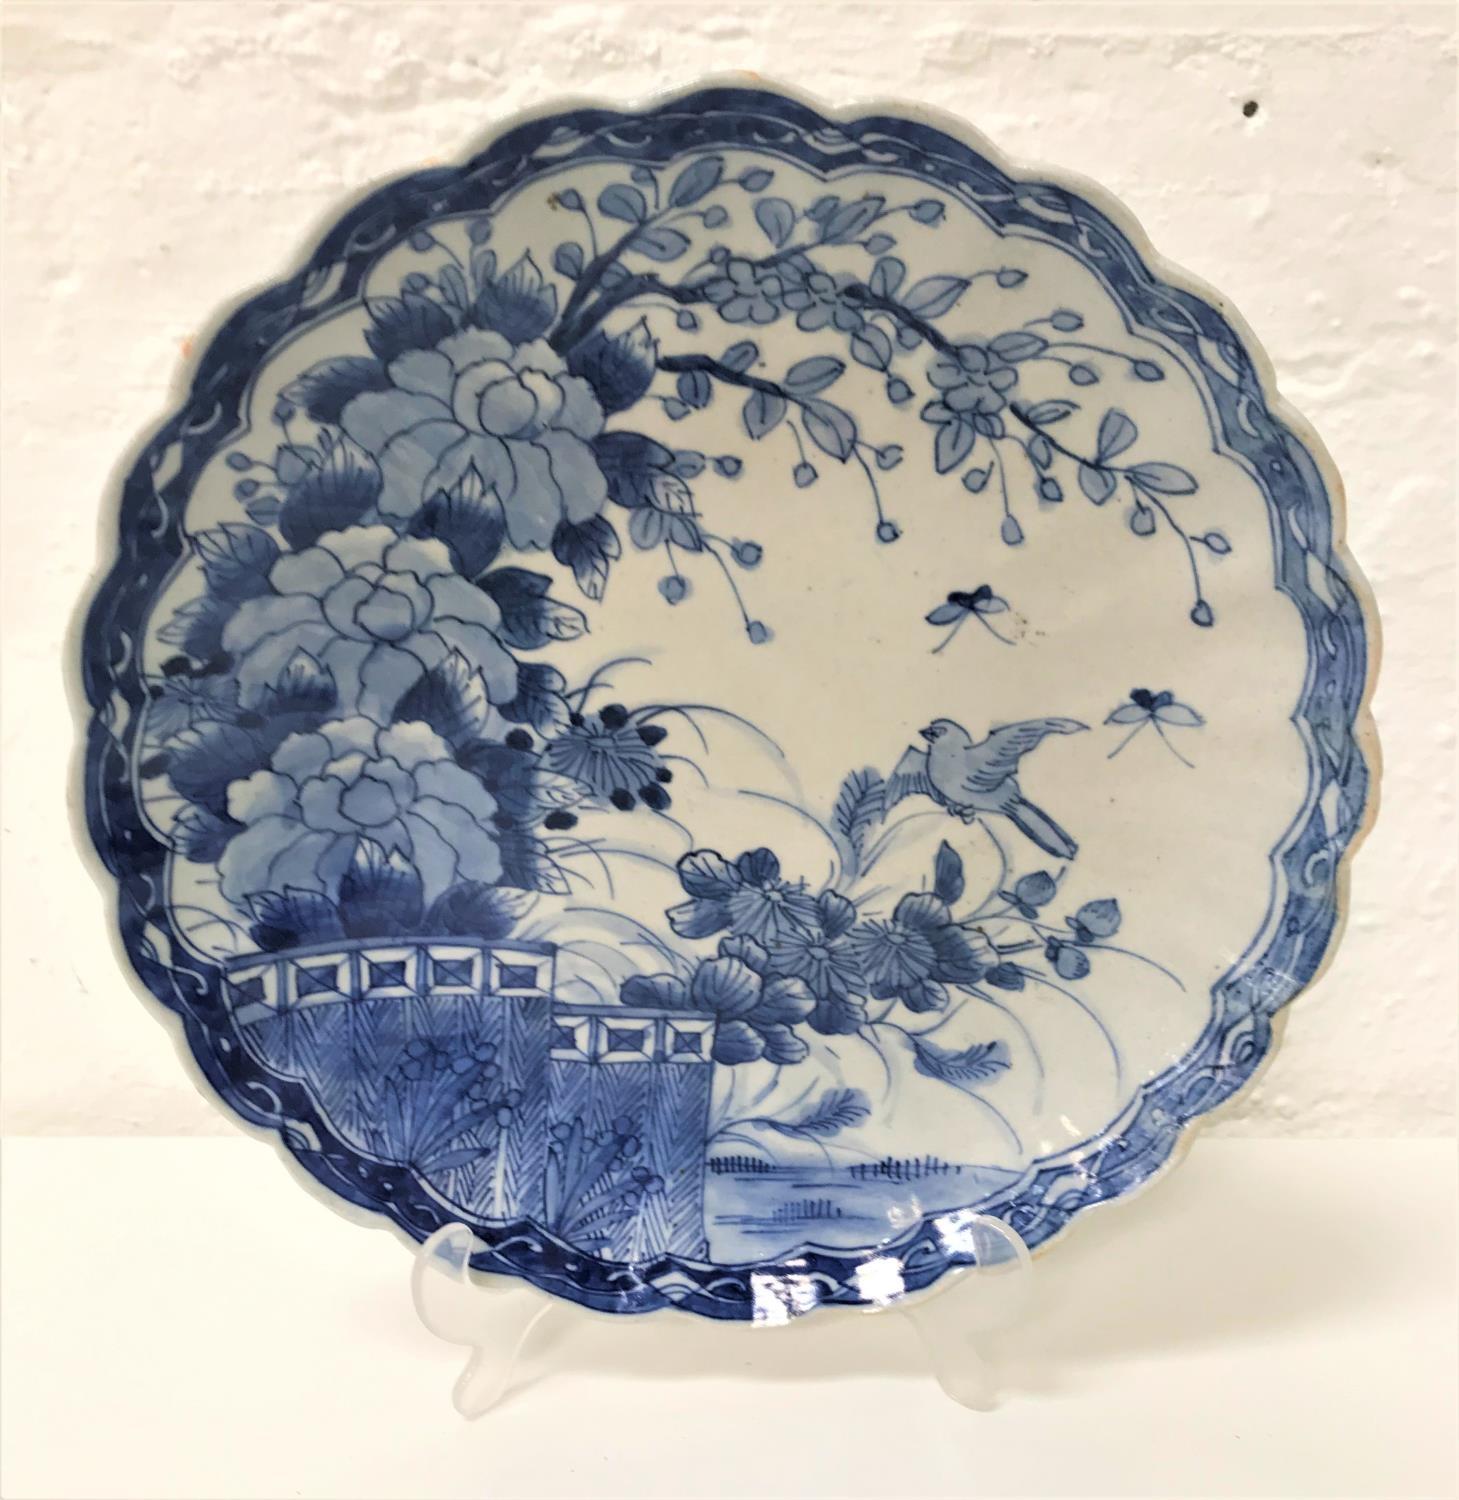 CHINESE CHARGER with a wavy rim decorated in blue and white with flowers and a bird, the underside